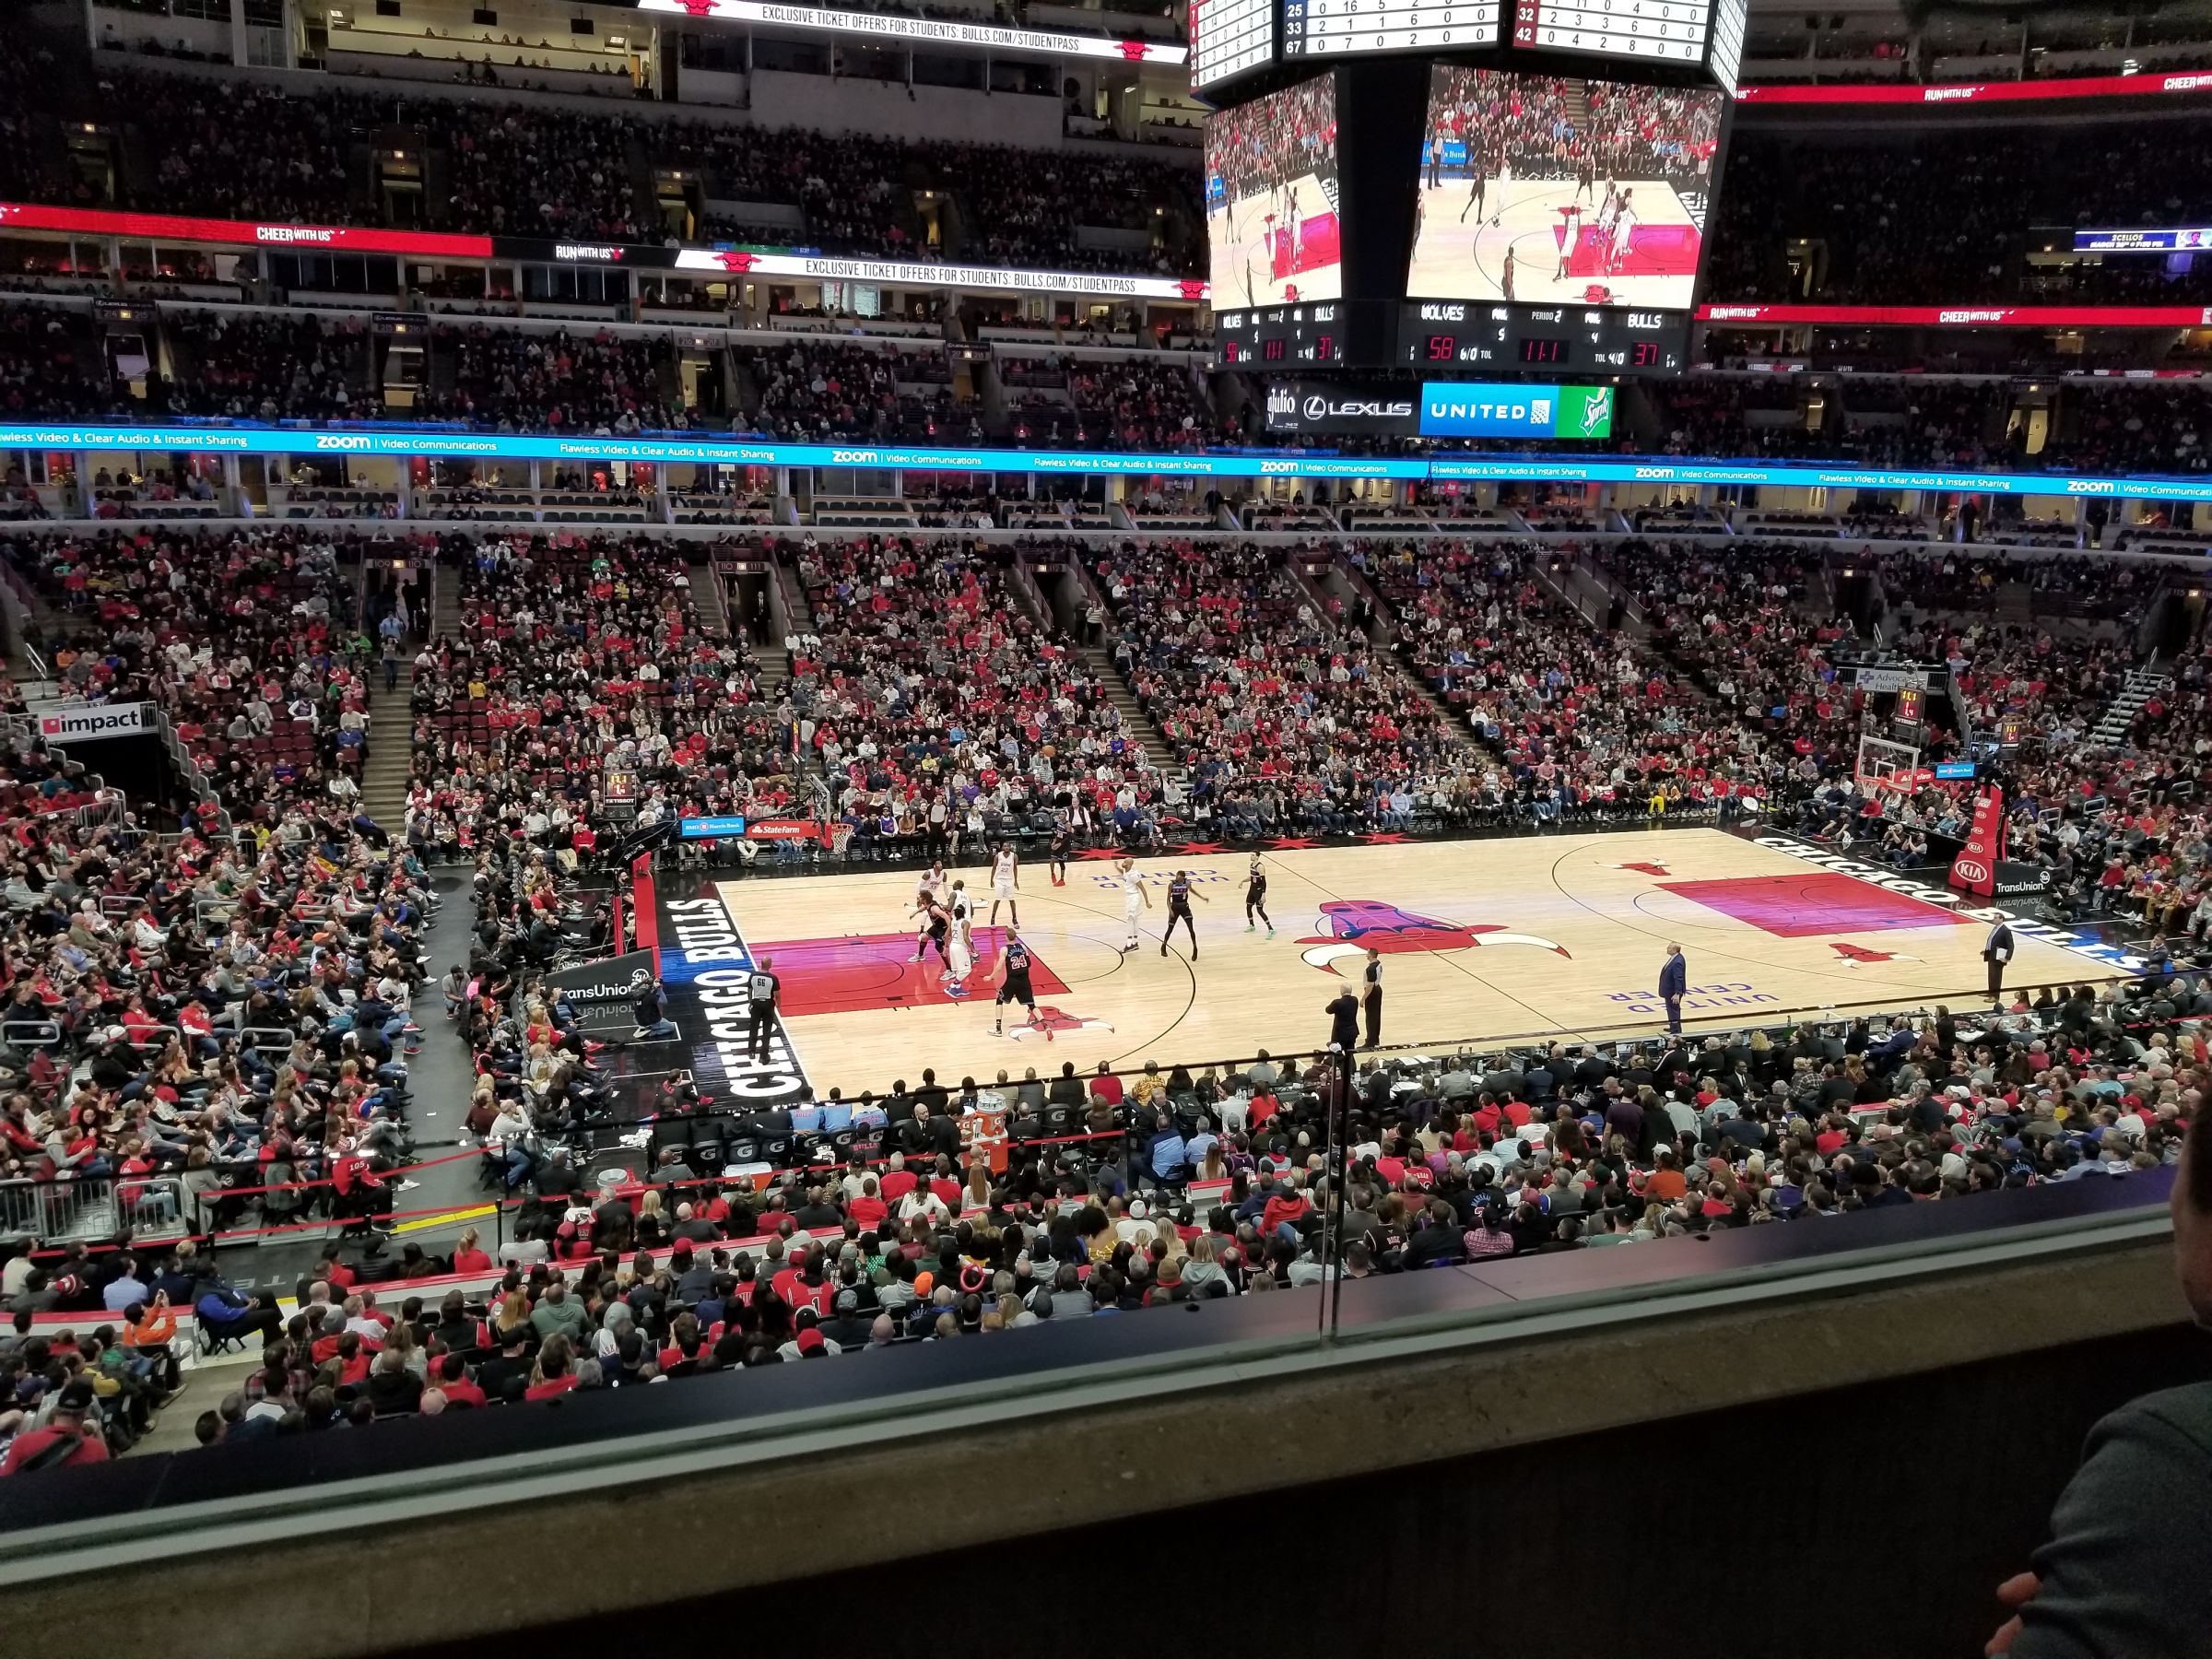 Section 202 at United Center - Chicago Bulls - RateYourSeats.com